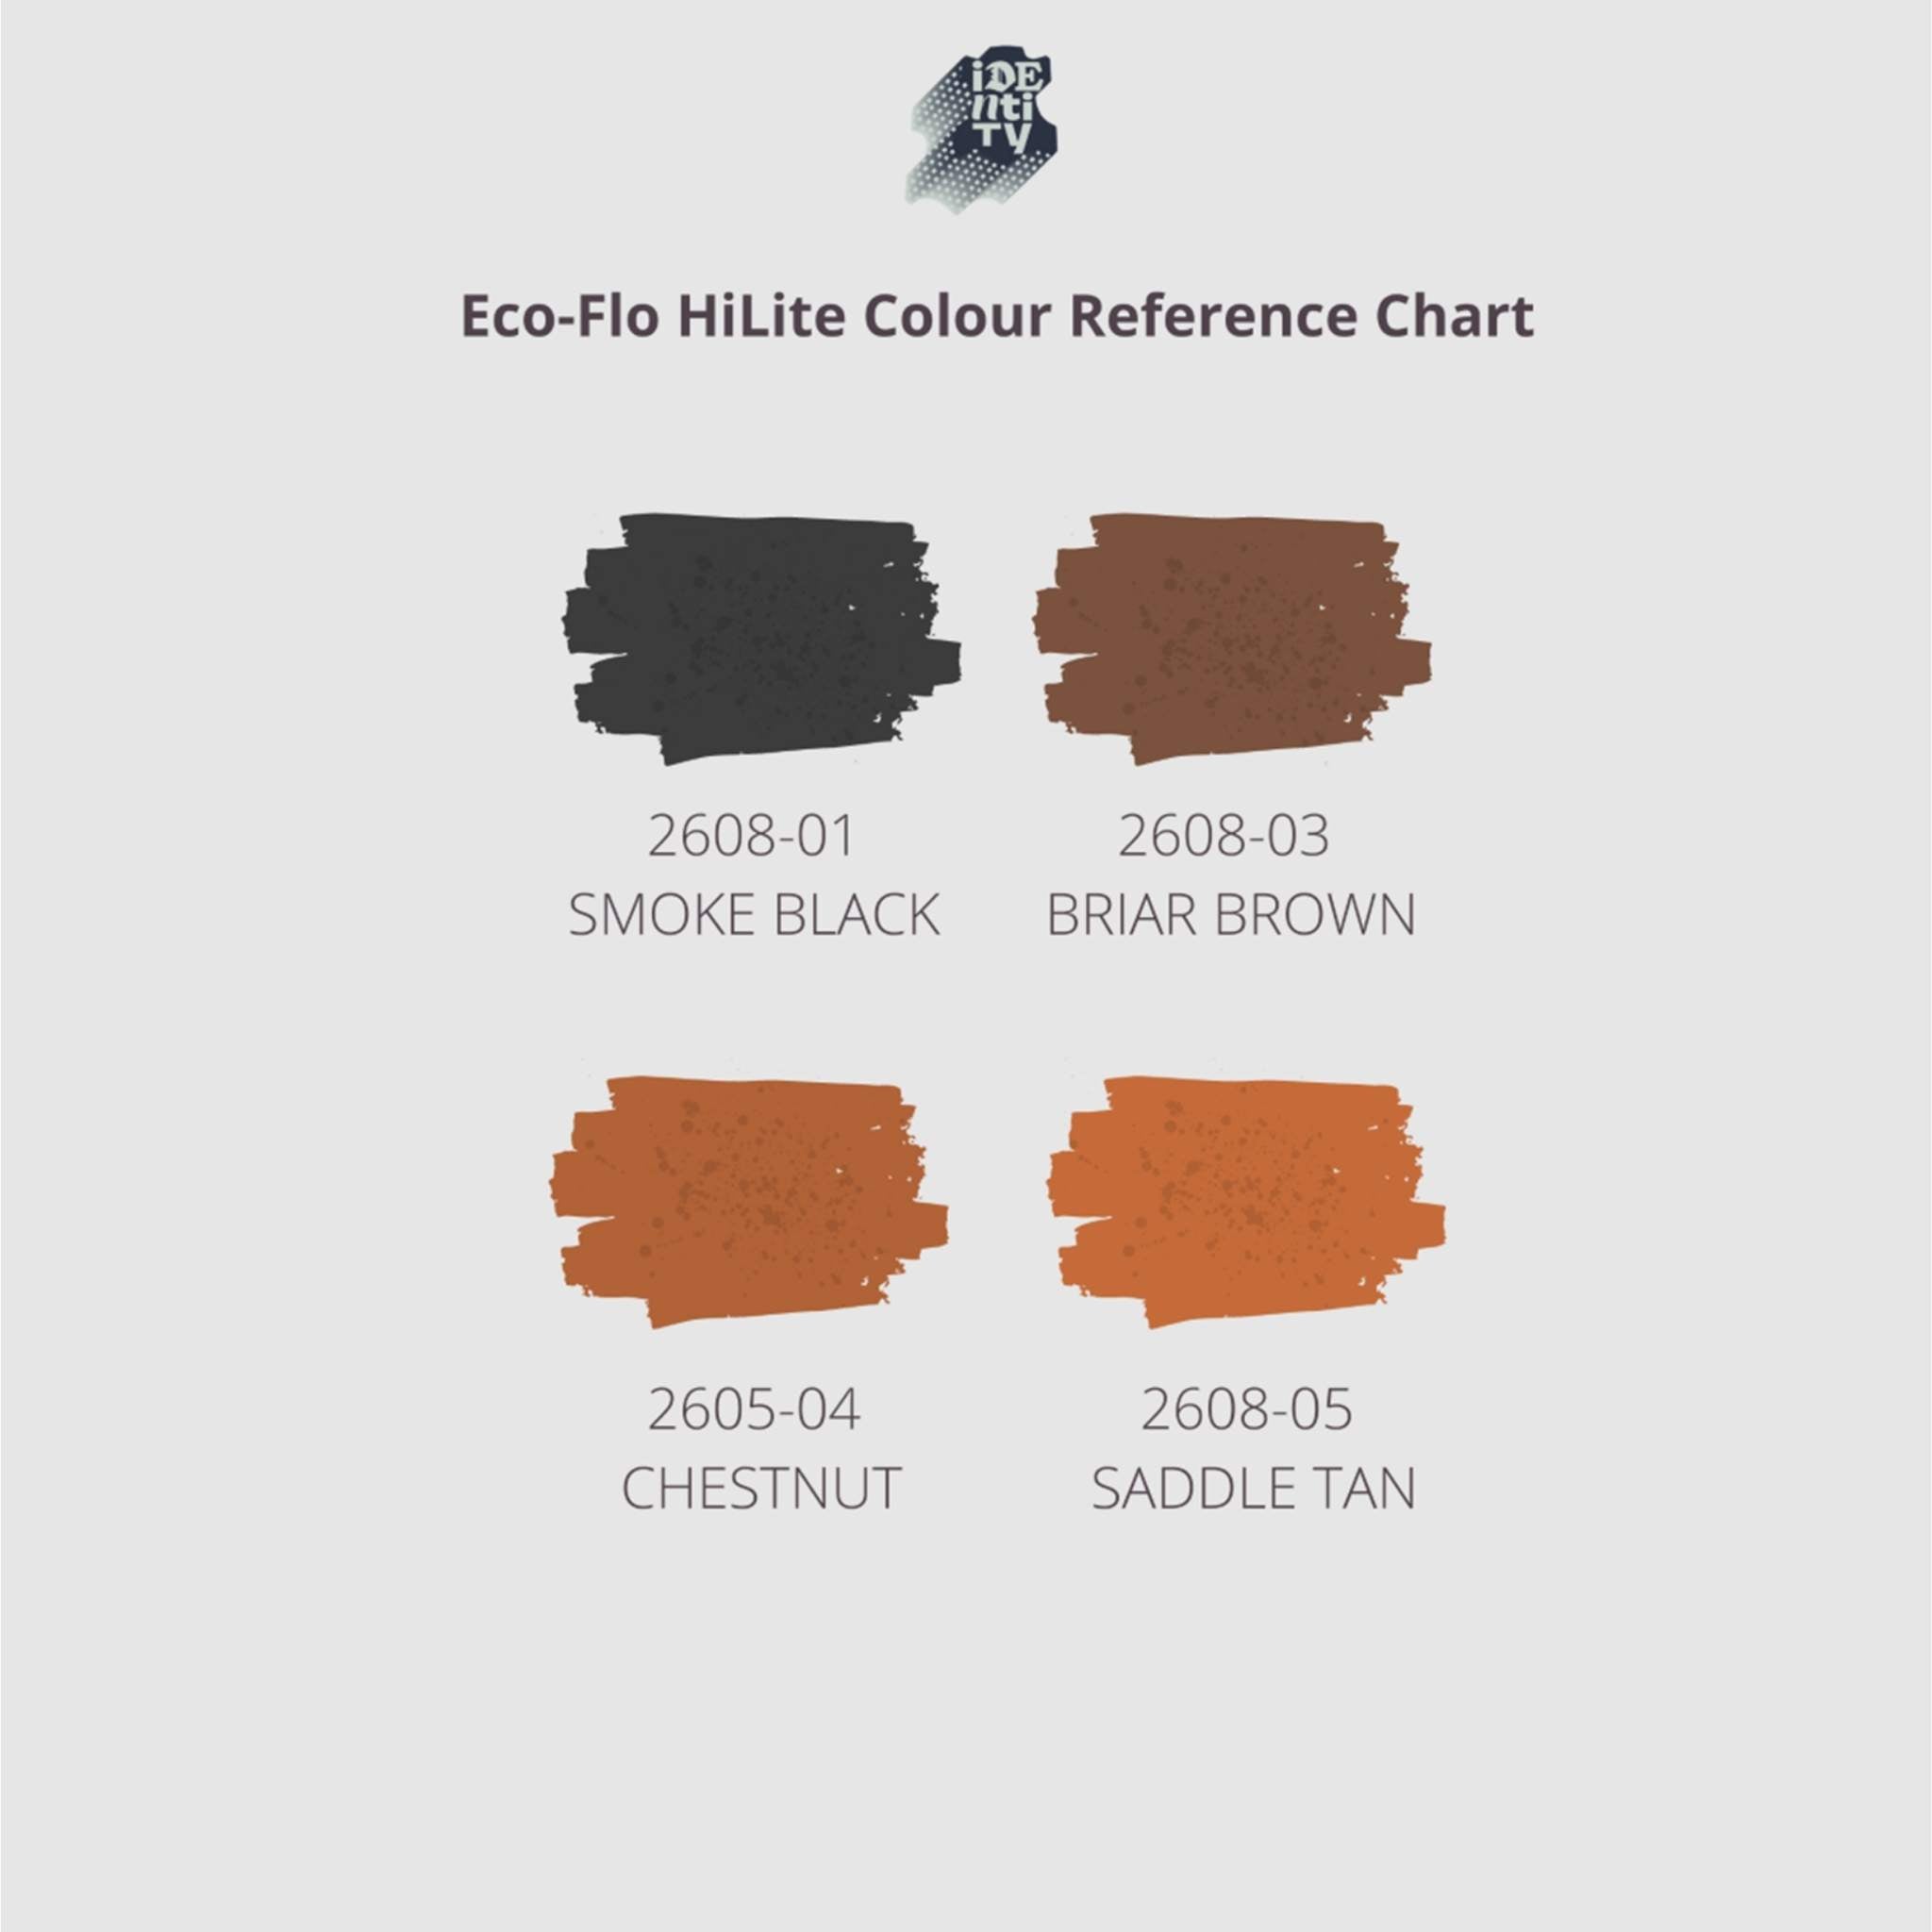 Colour Reference Chart for Eco Flo HiLite